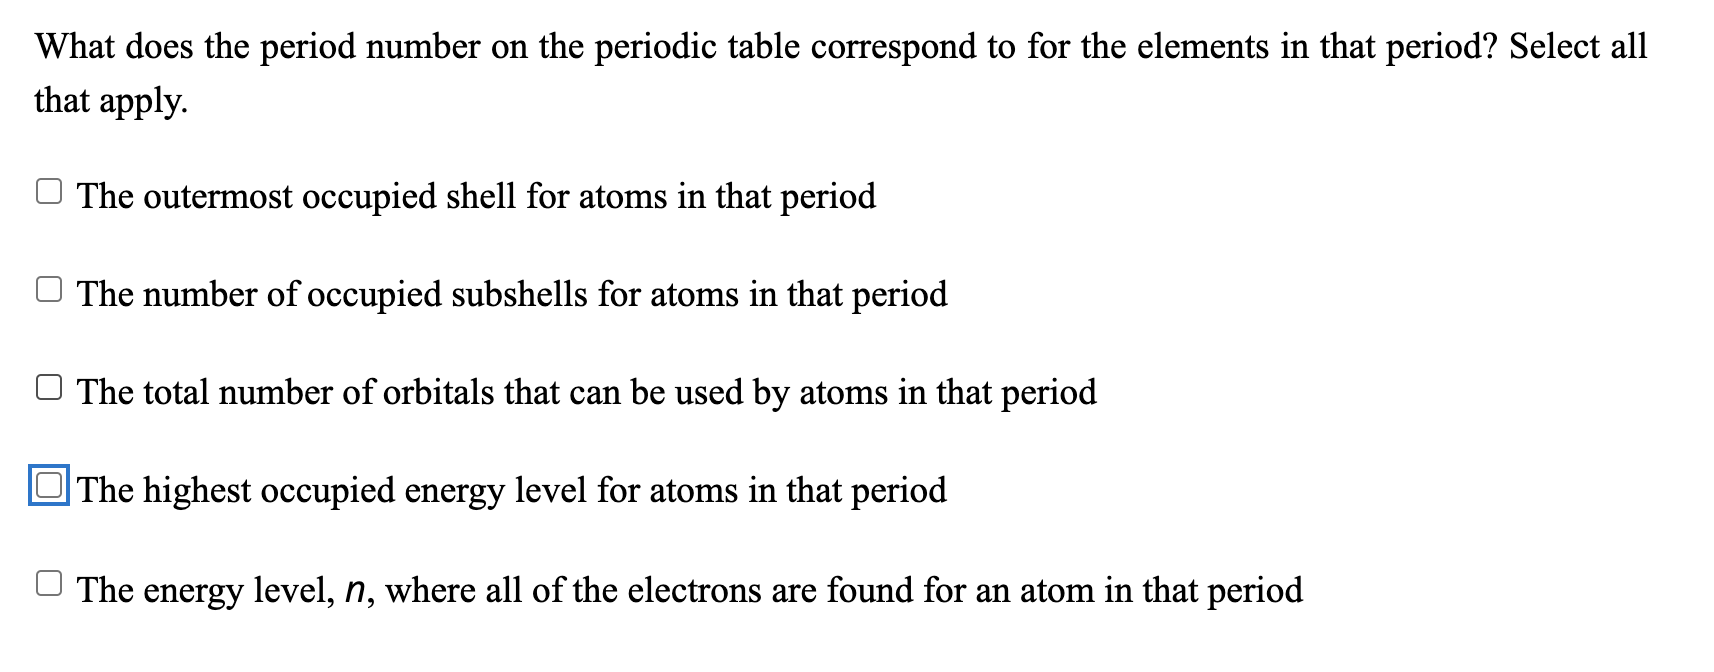 Period Number On The Periodic Table